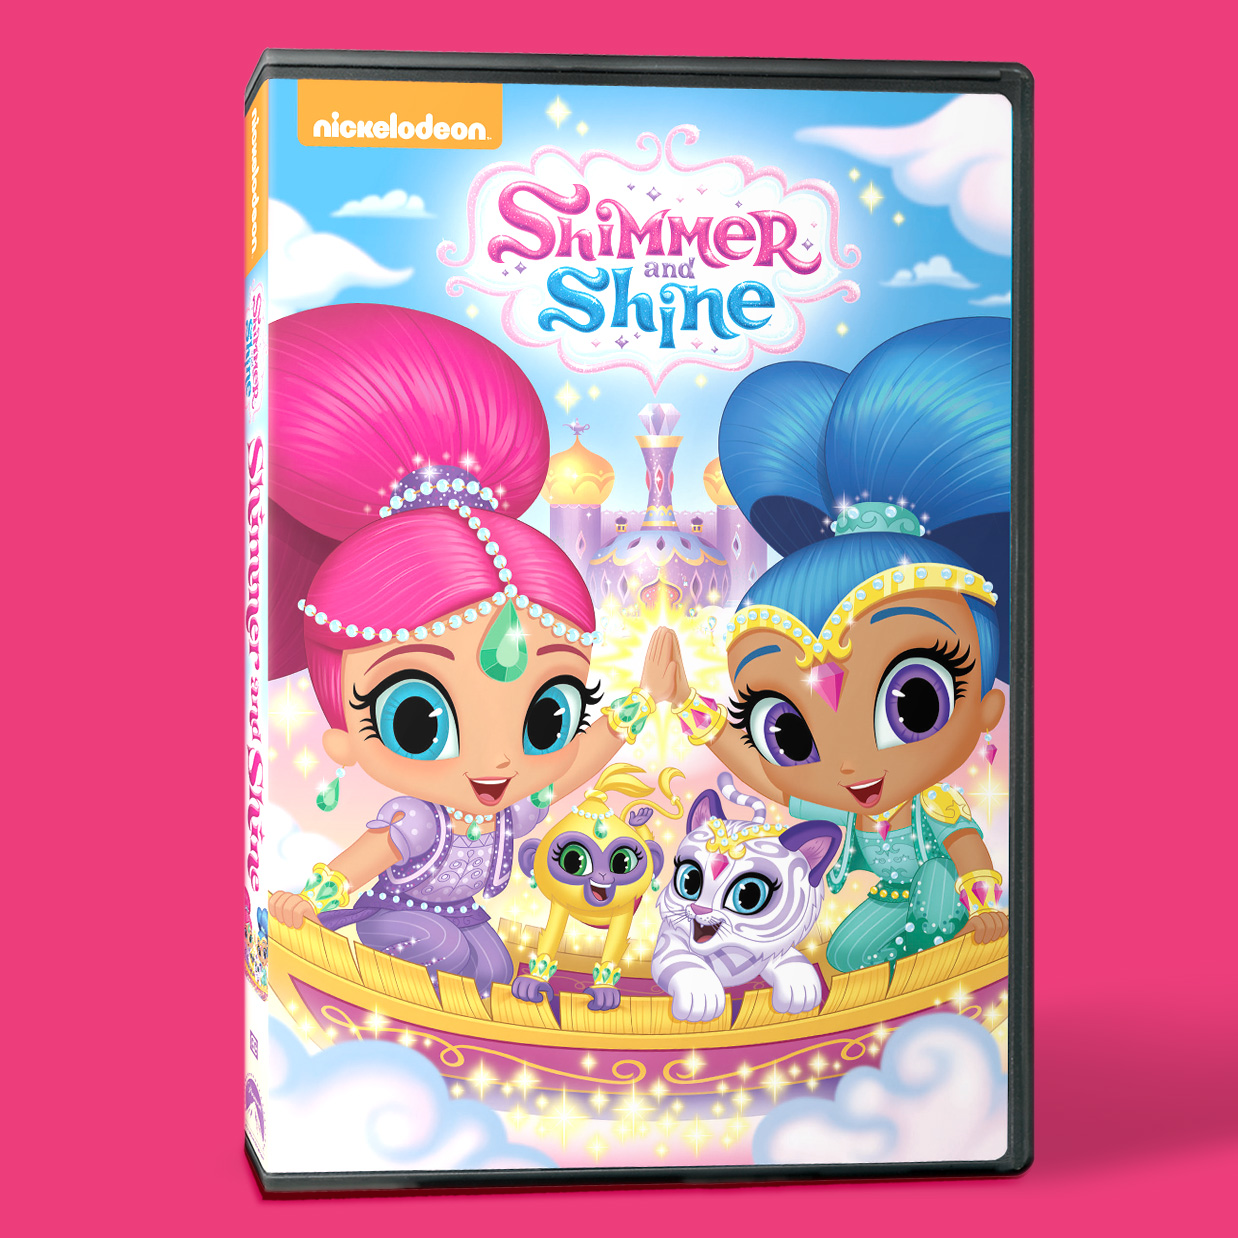 Shimmer and Shine Sleepover Party